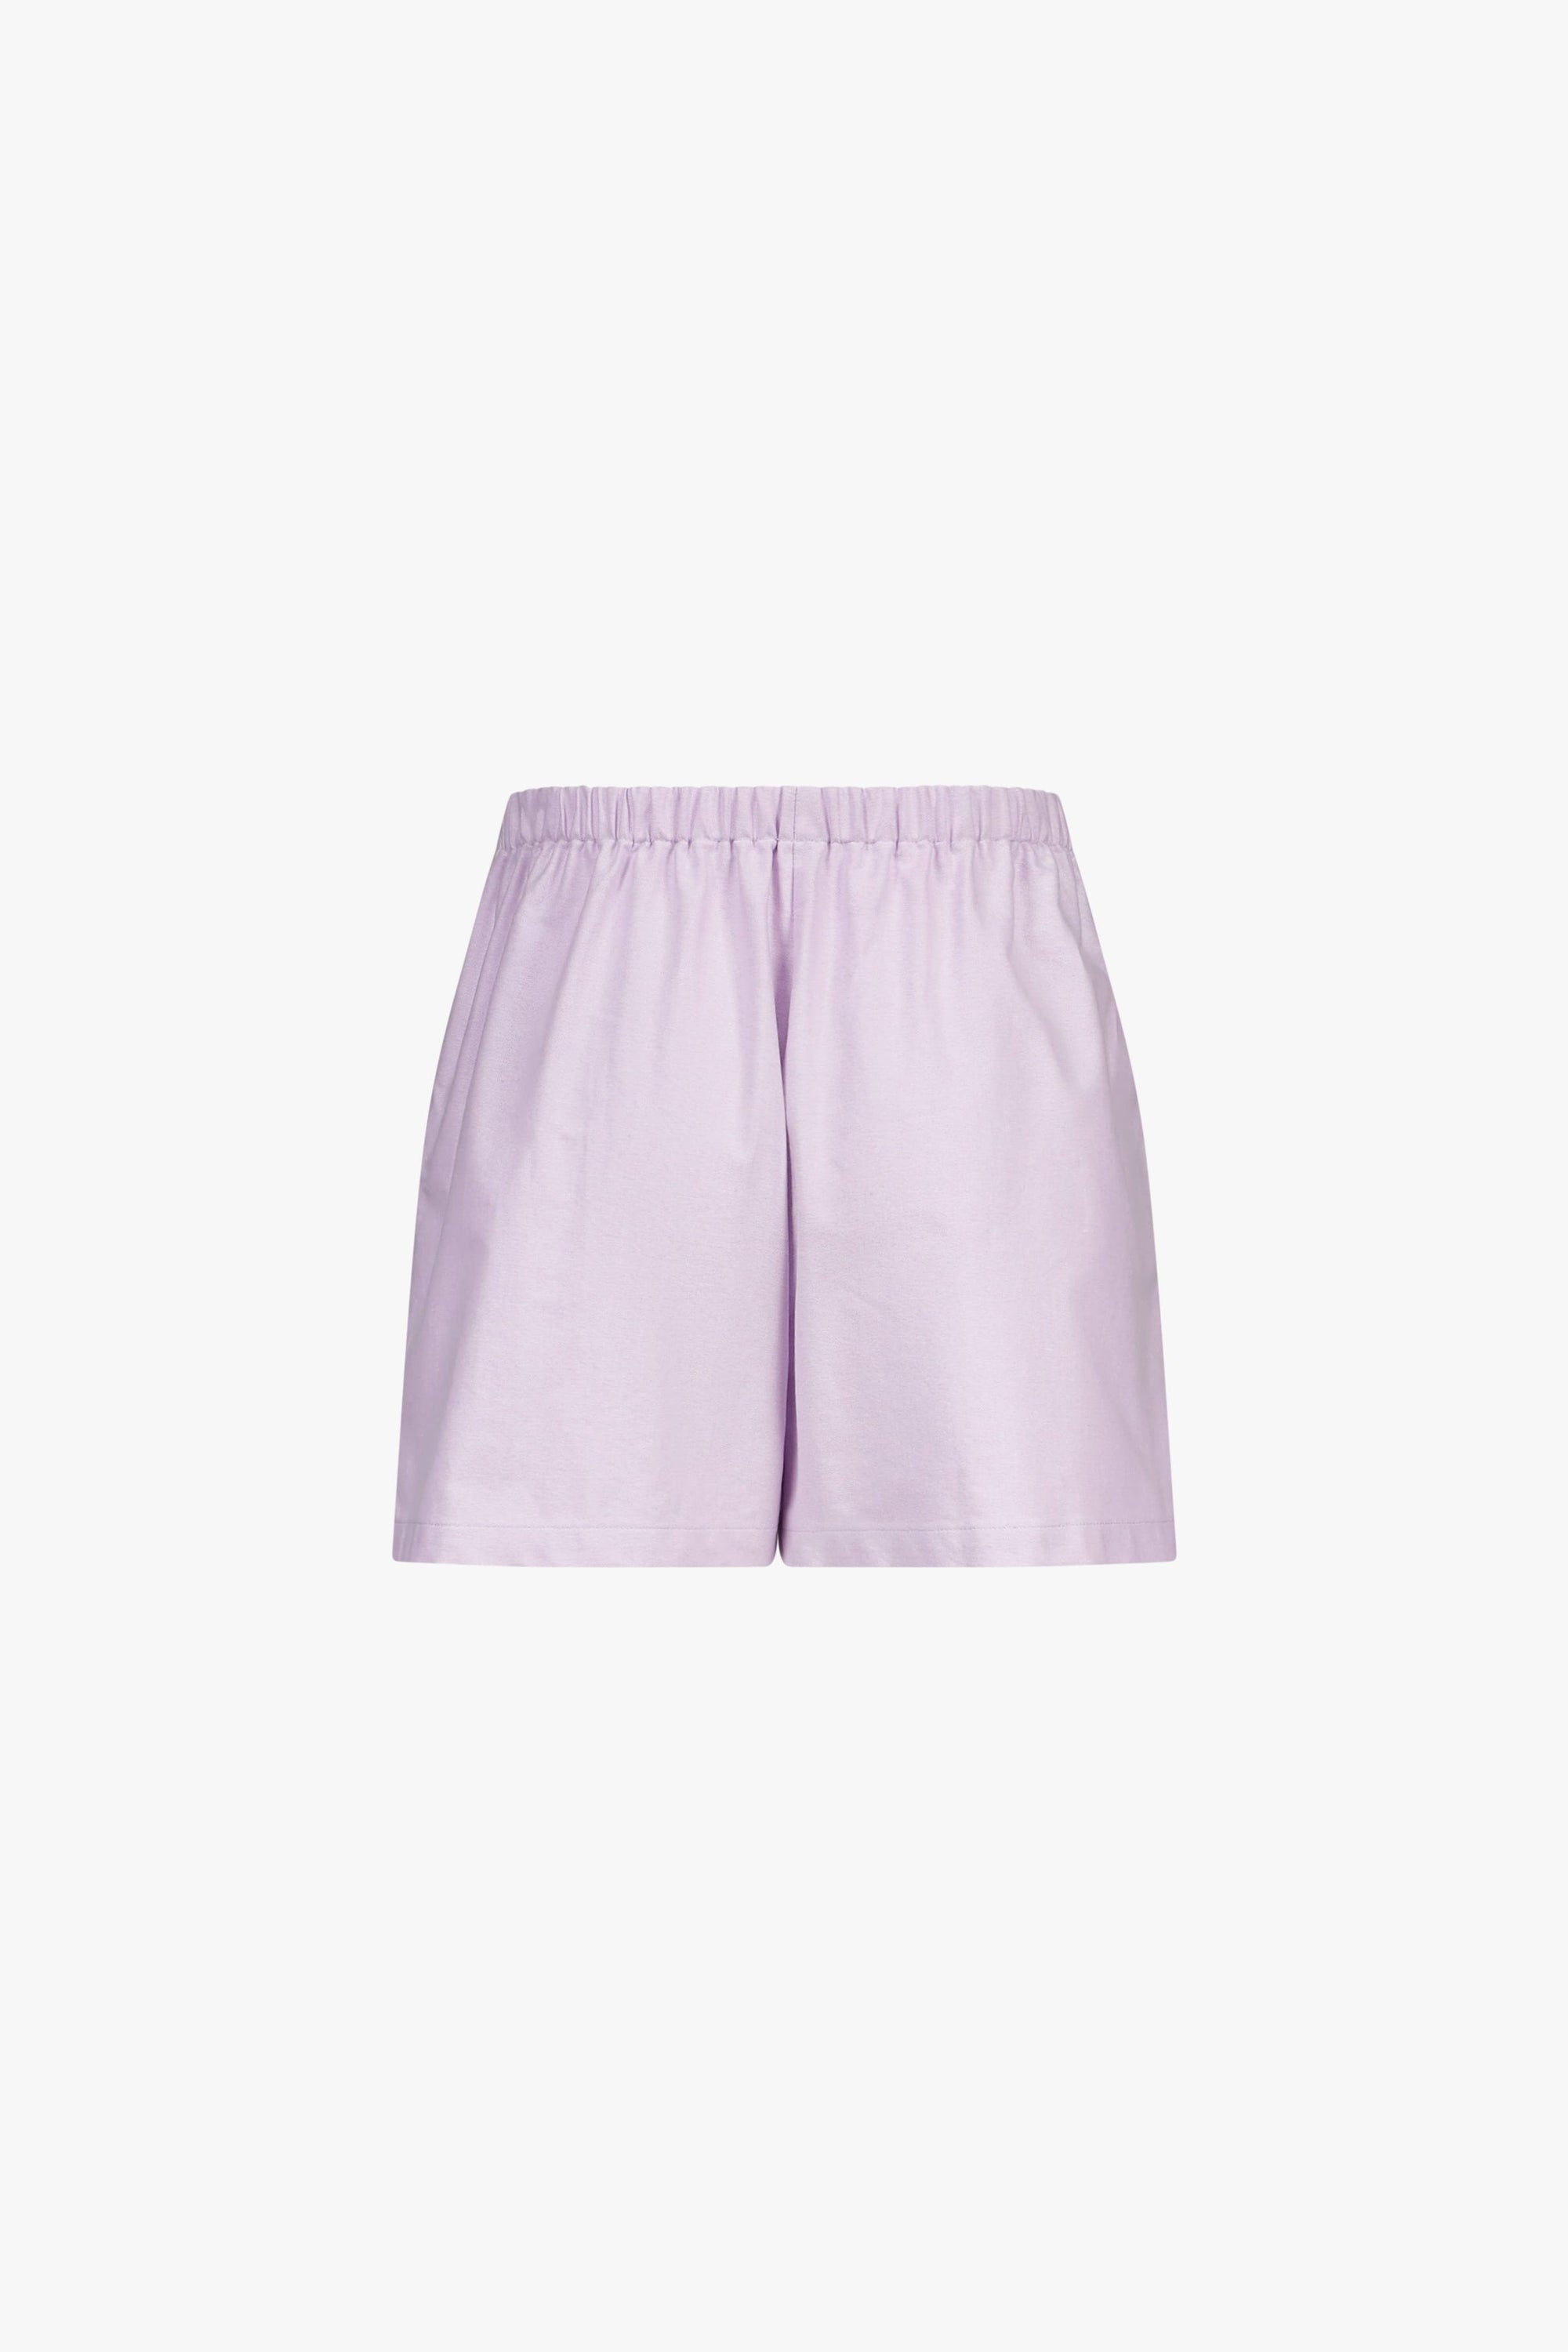 Oxford Boxer Shorts in Lilac